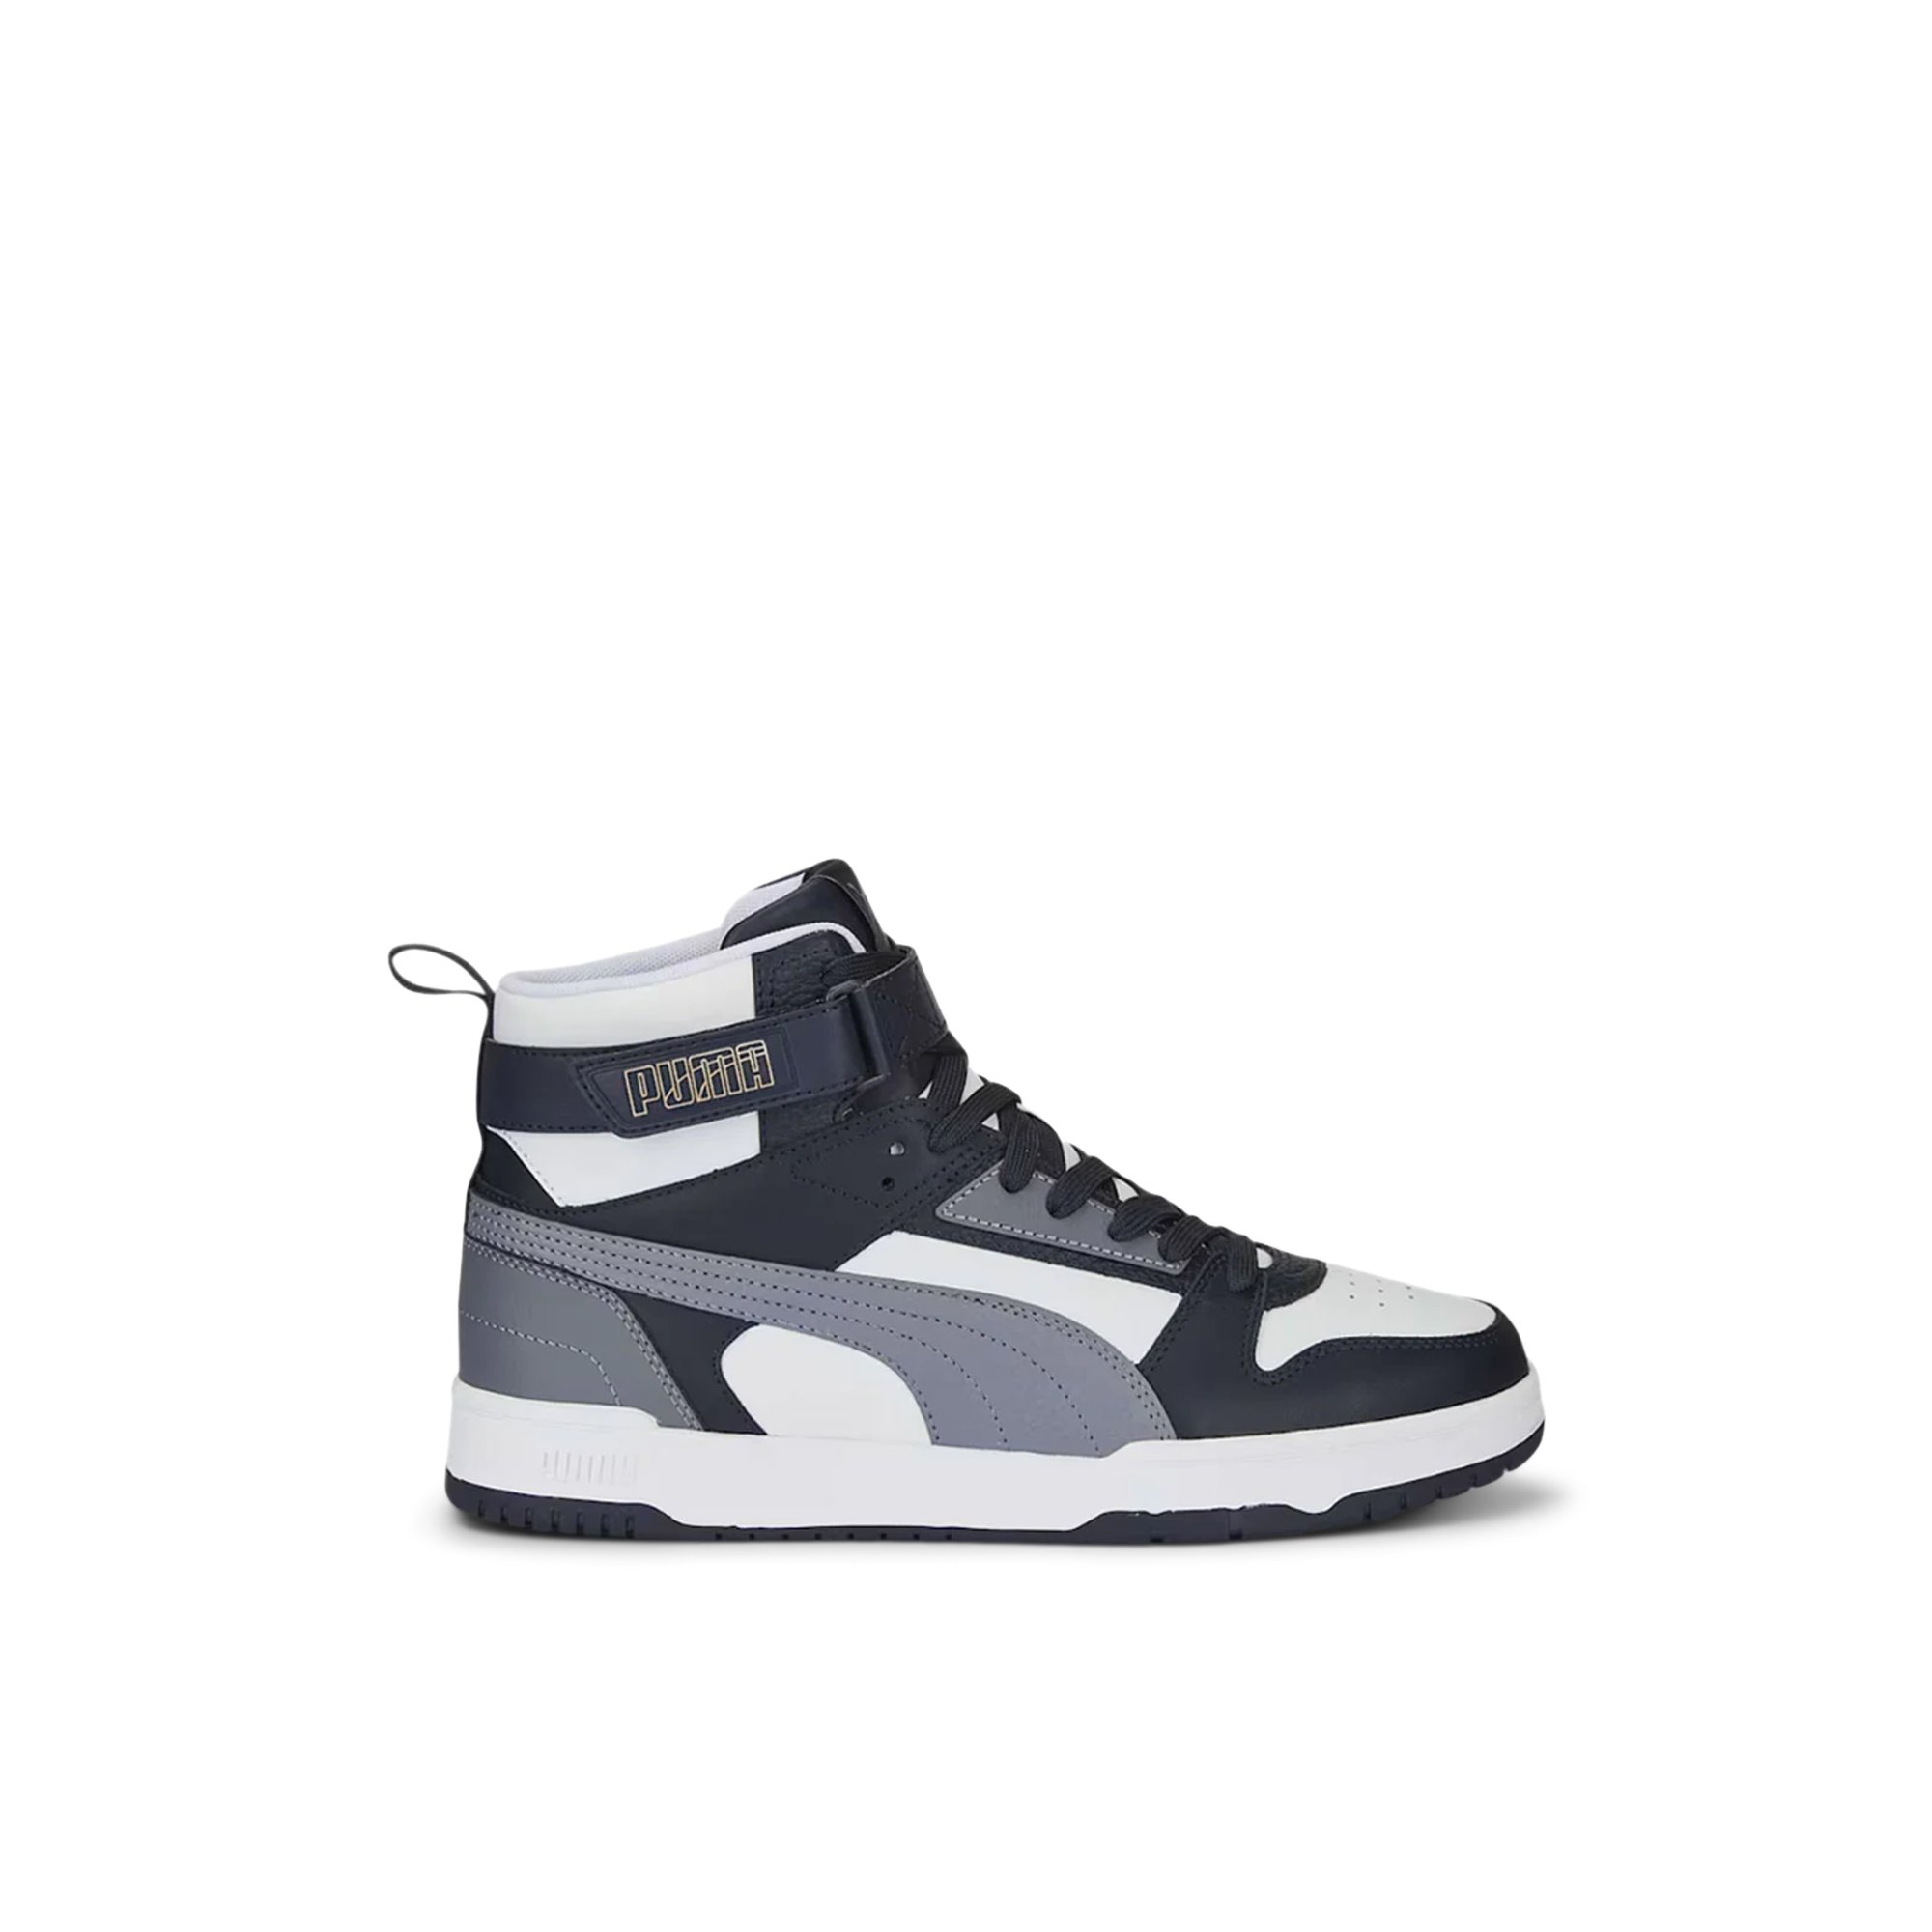 Puma Rbd Game-tb - T Collection Boys Shoes Multi